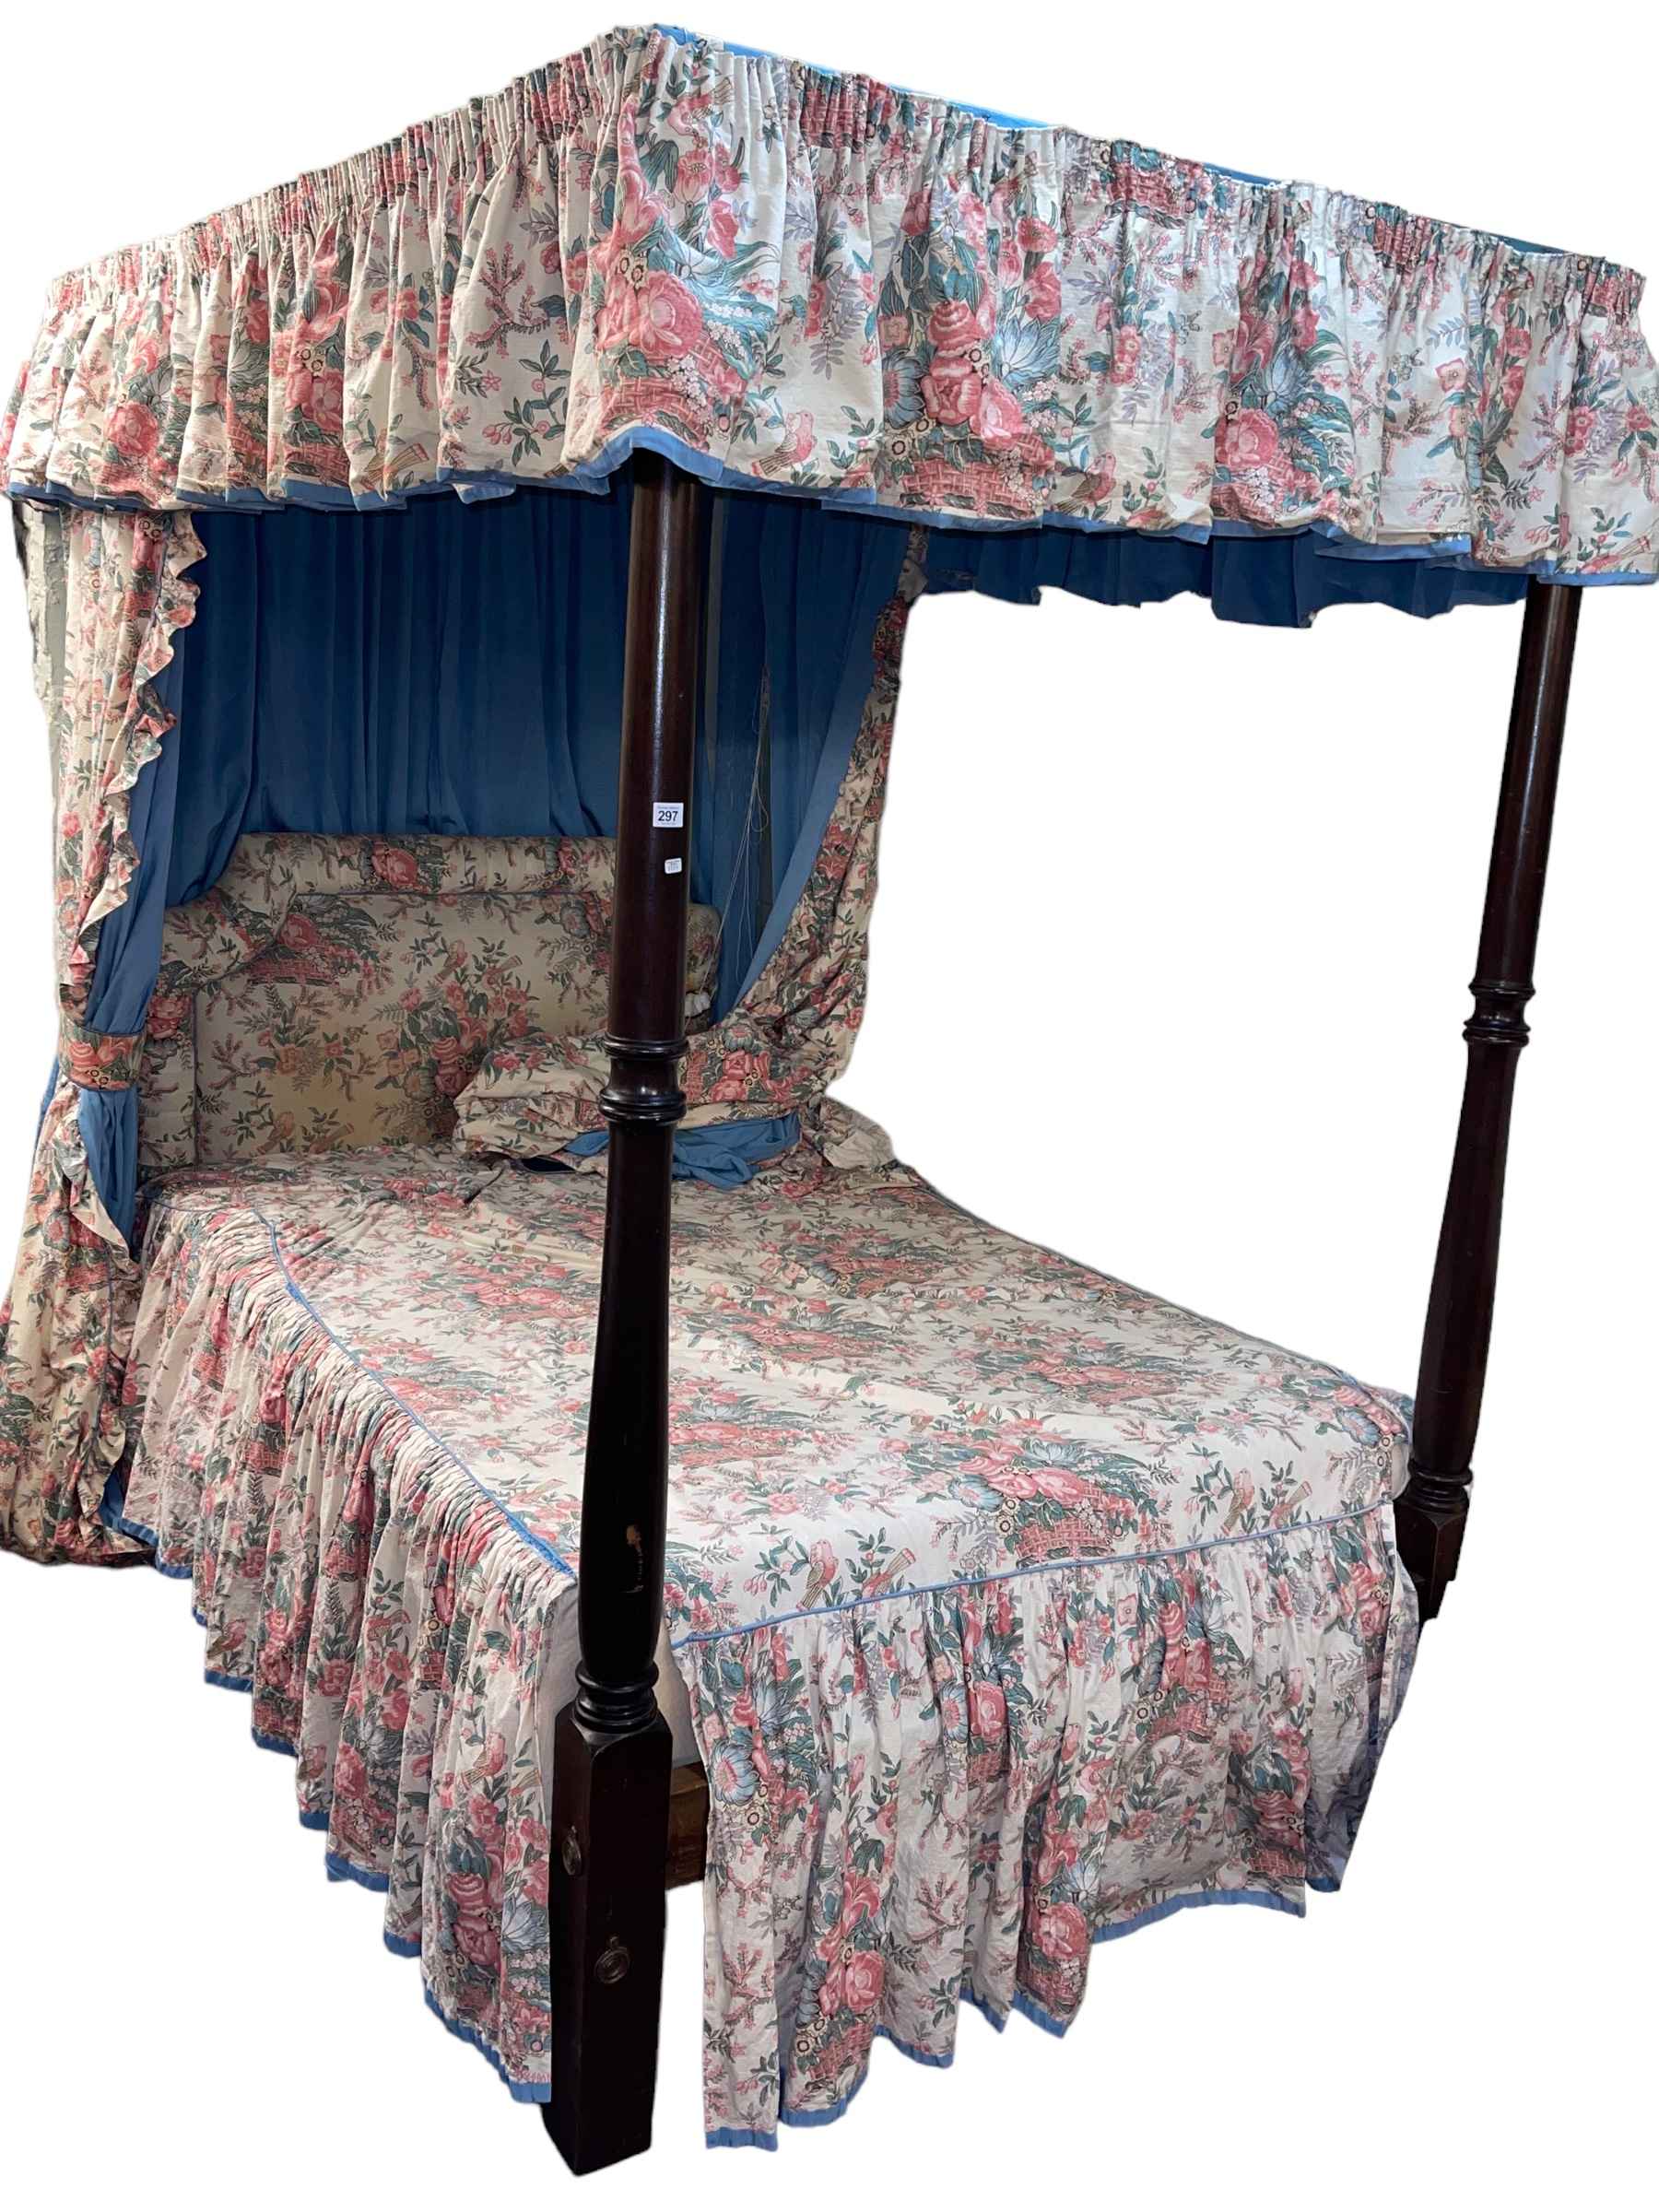 Turned mahogany 4ft four poster bed complete with floral print drapes.